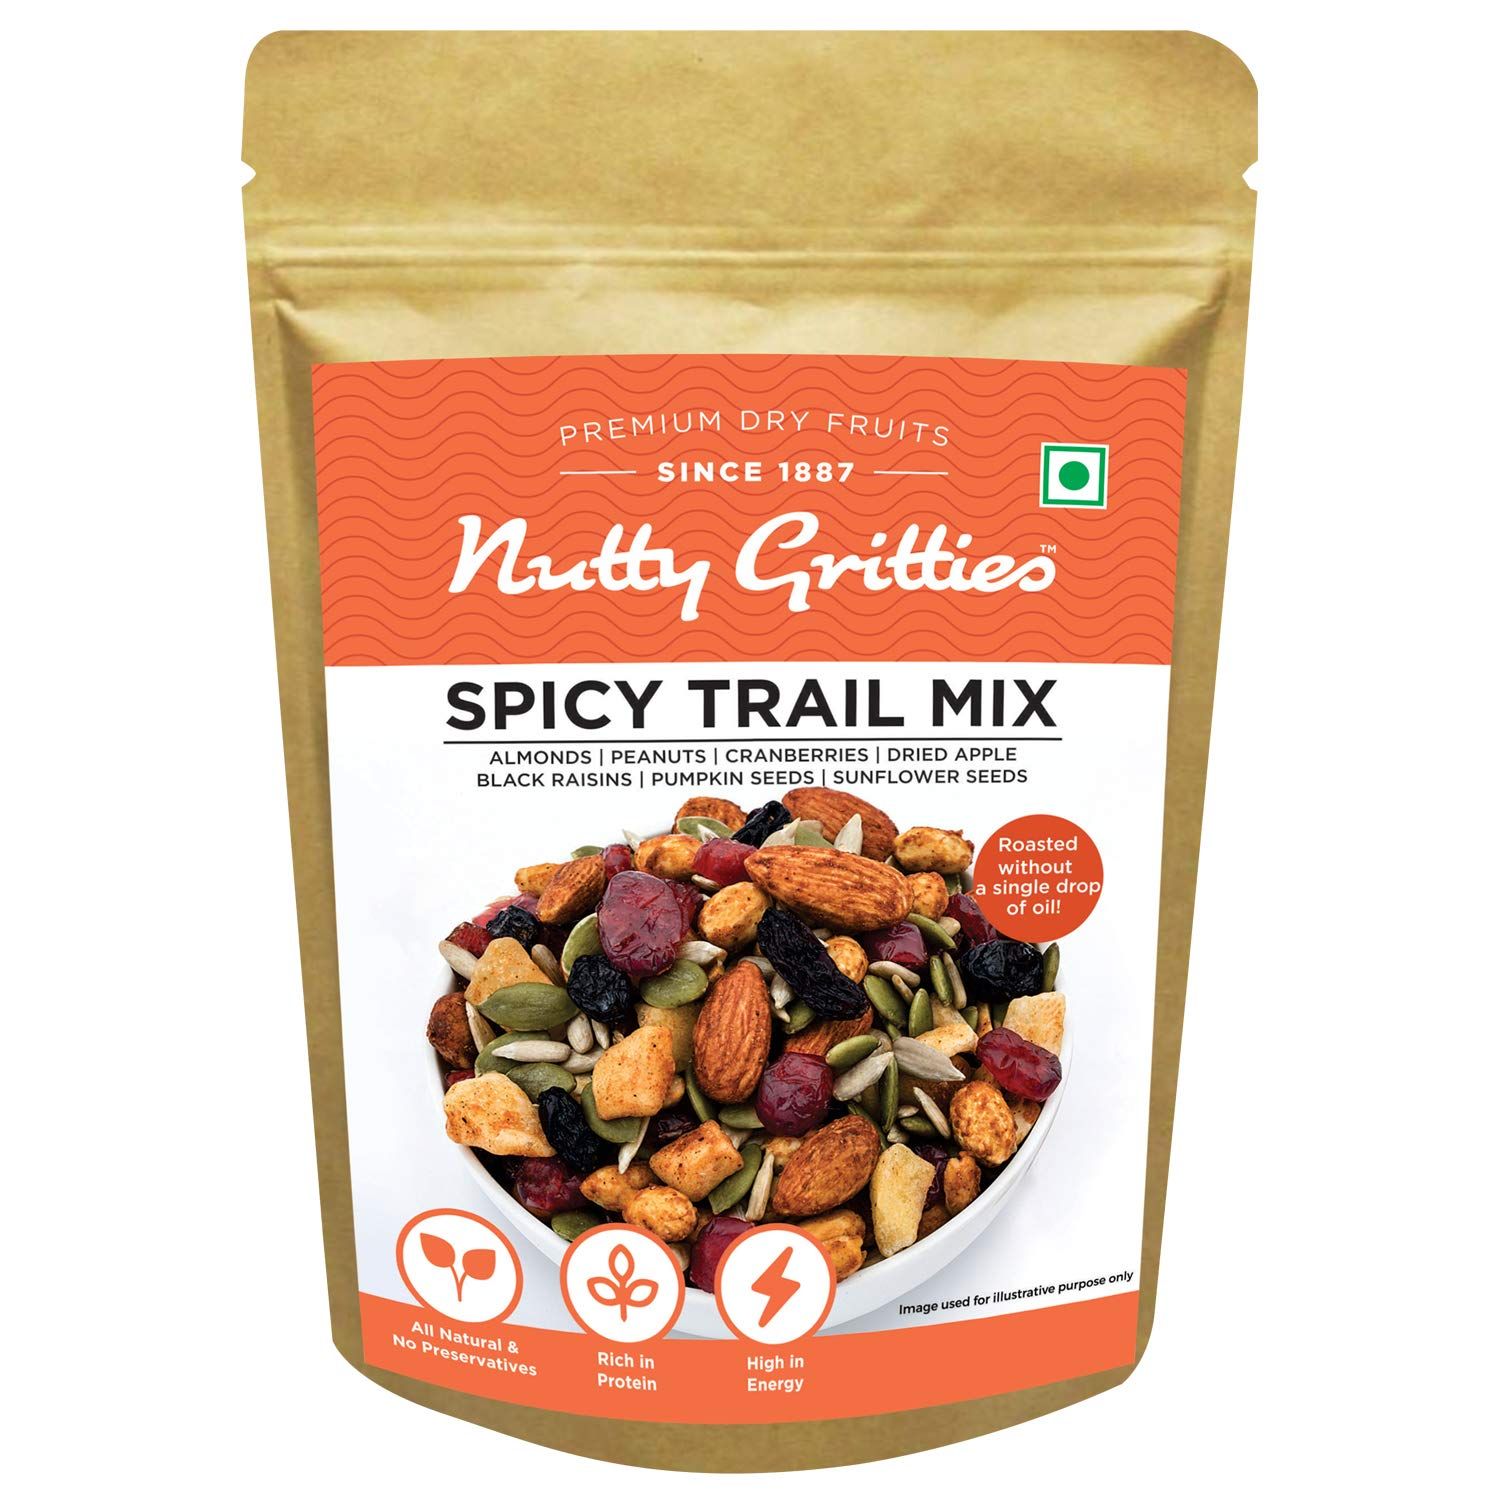 Nutty Gritties Spicy Trail Mix Image